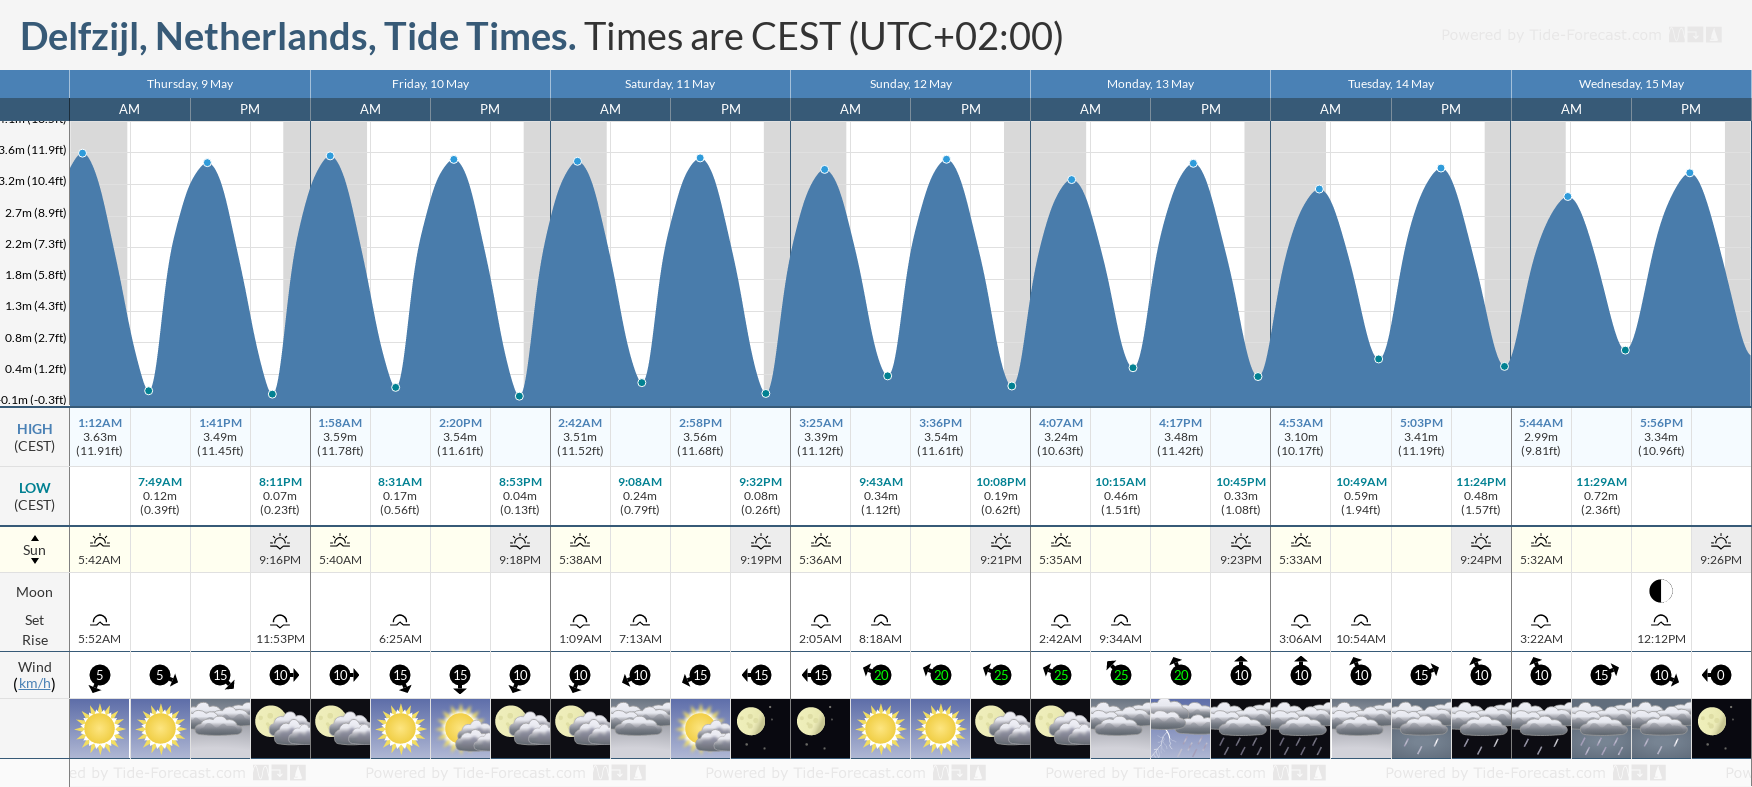 Delfzijl, Netherlands Tide Chart including high and low tide times for the next 7 days